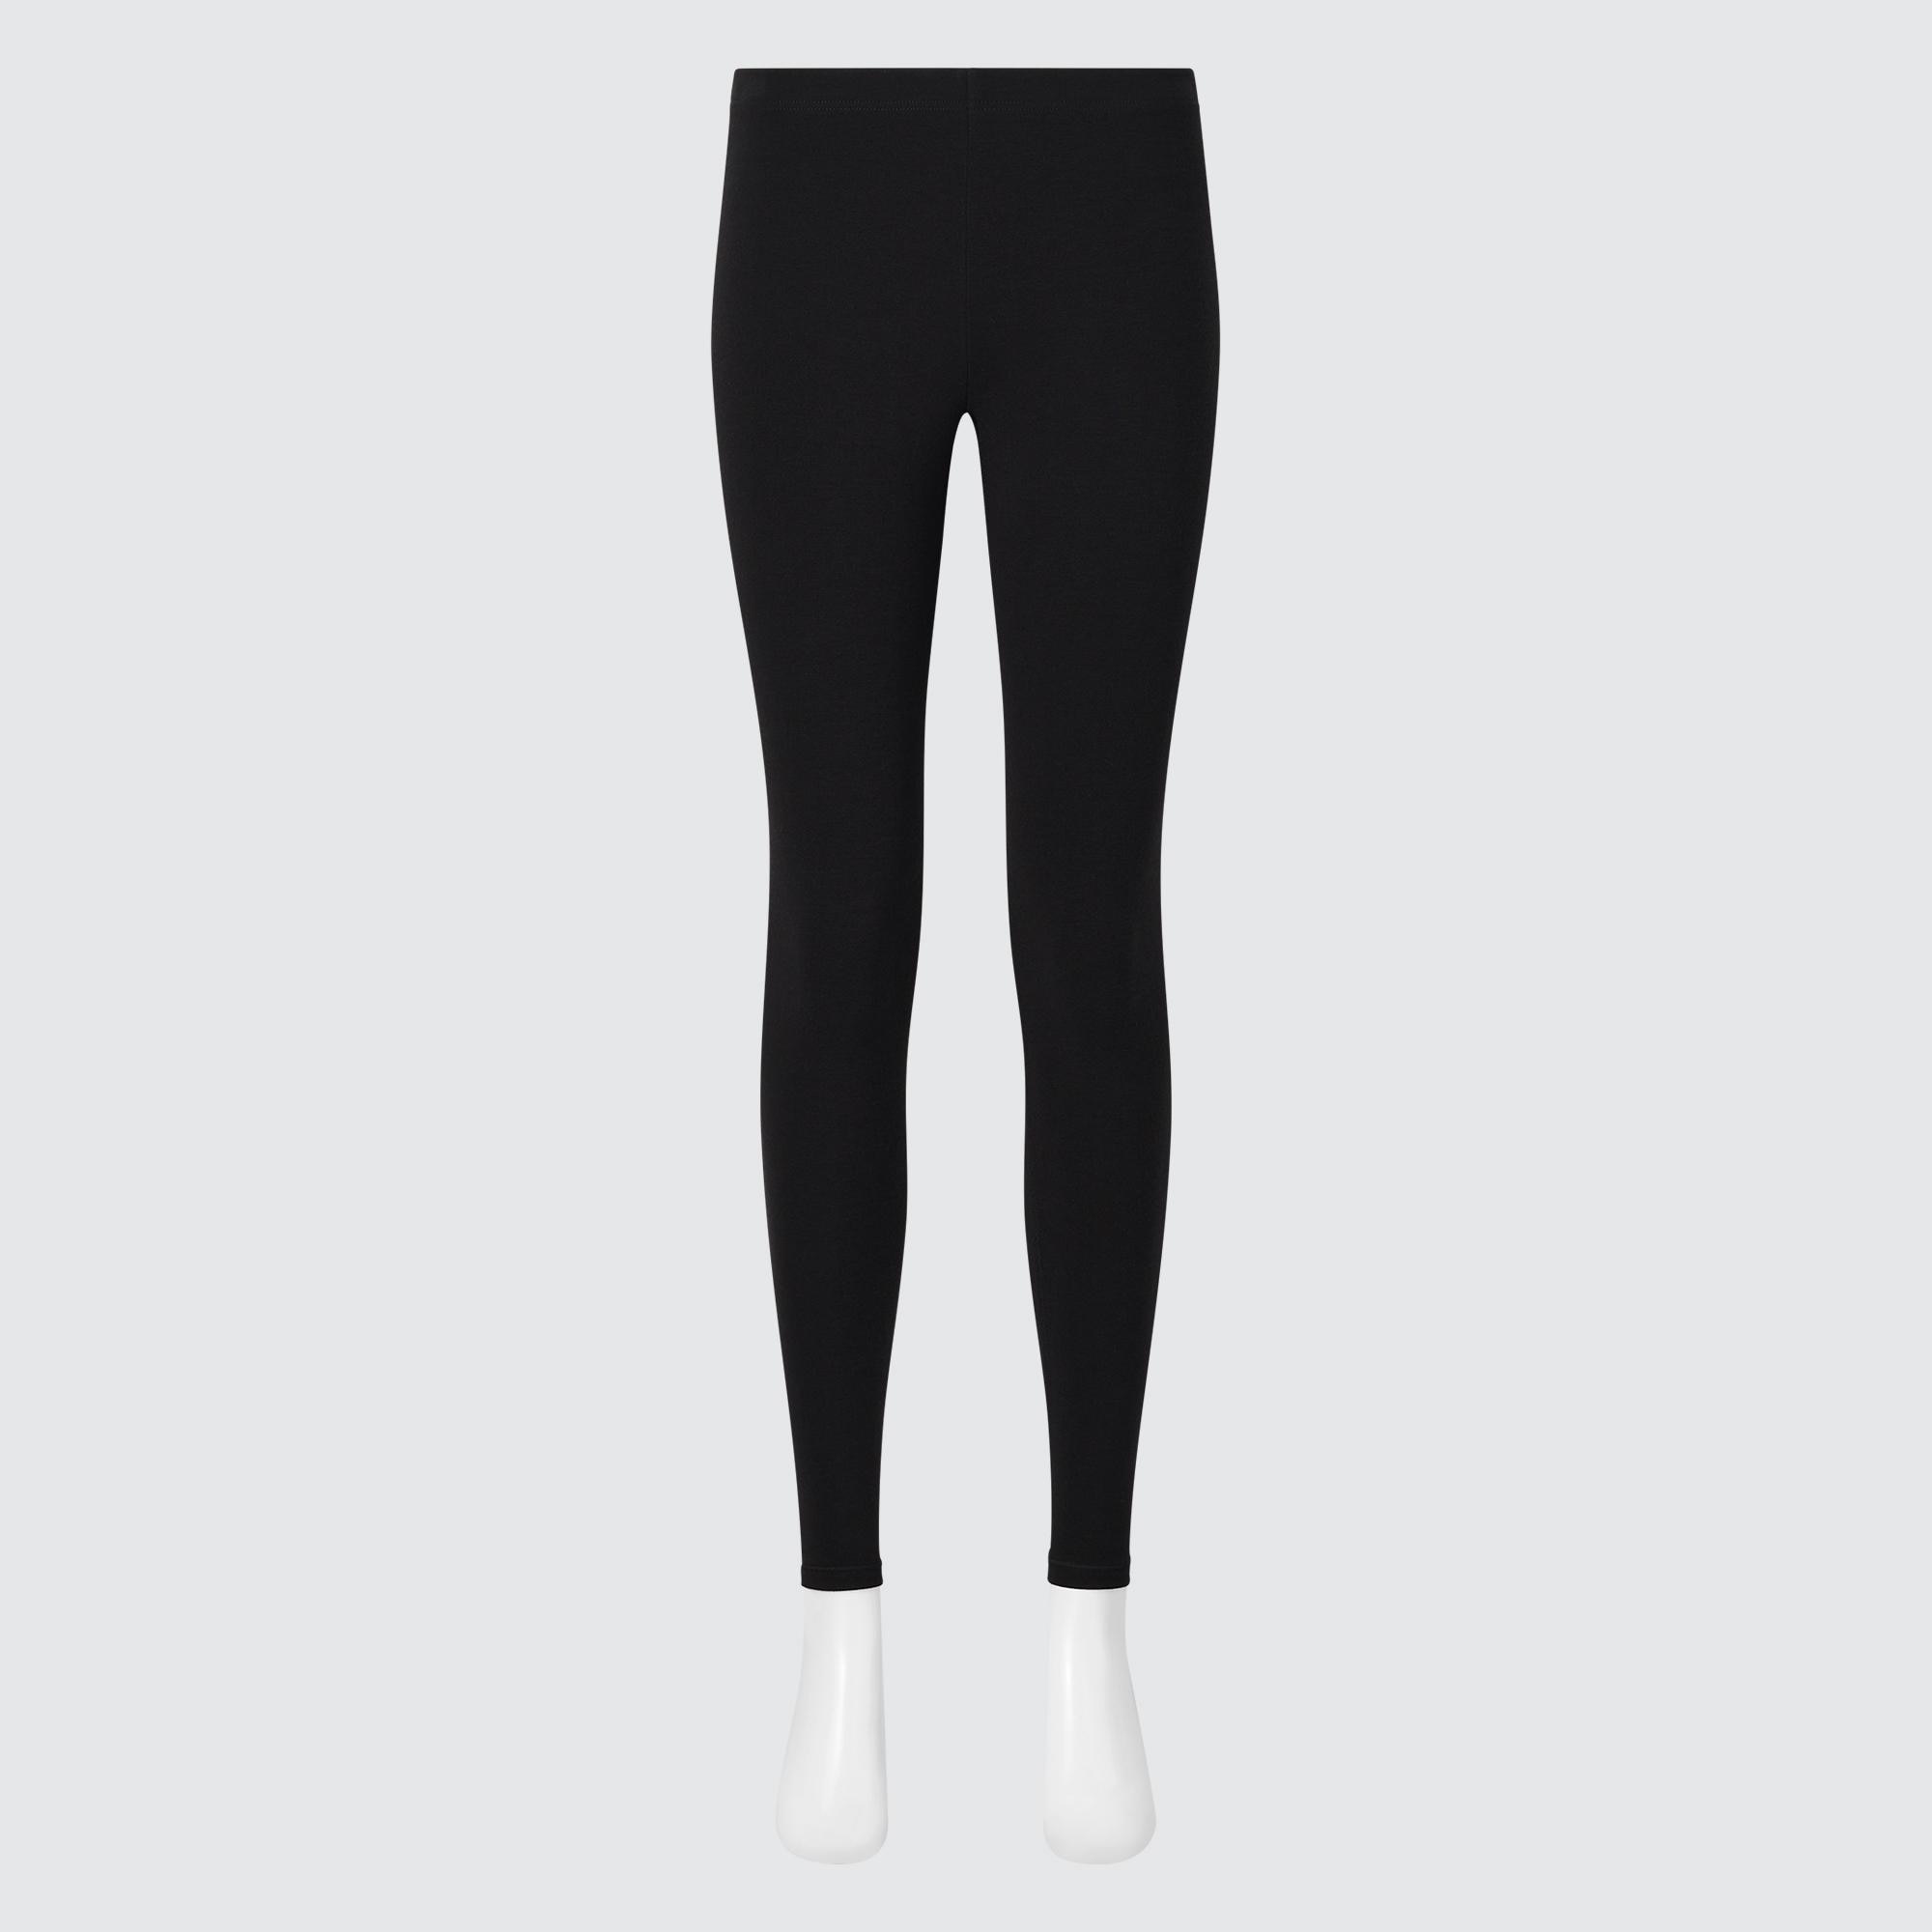 Long Johns - Buy Men's Long Johns Thermal Online in India – XYXX Apparels